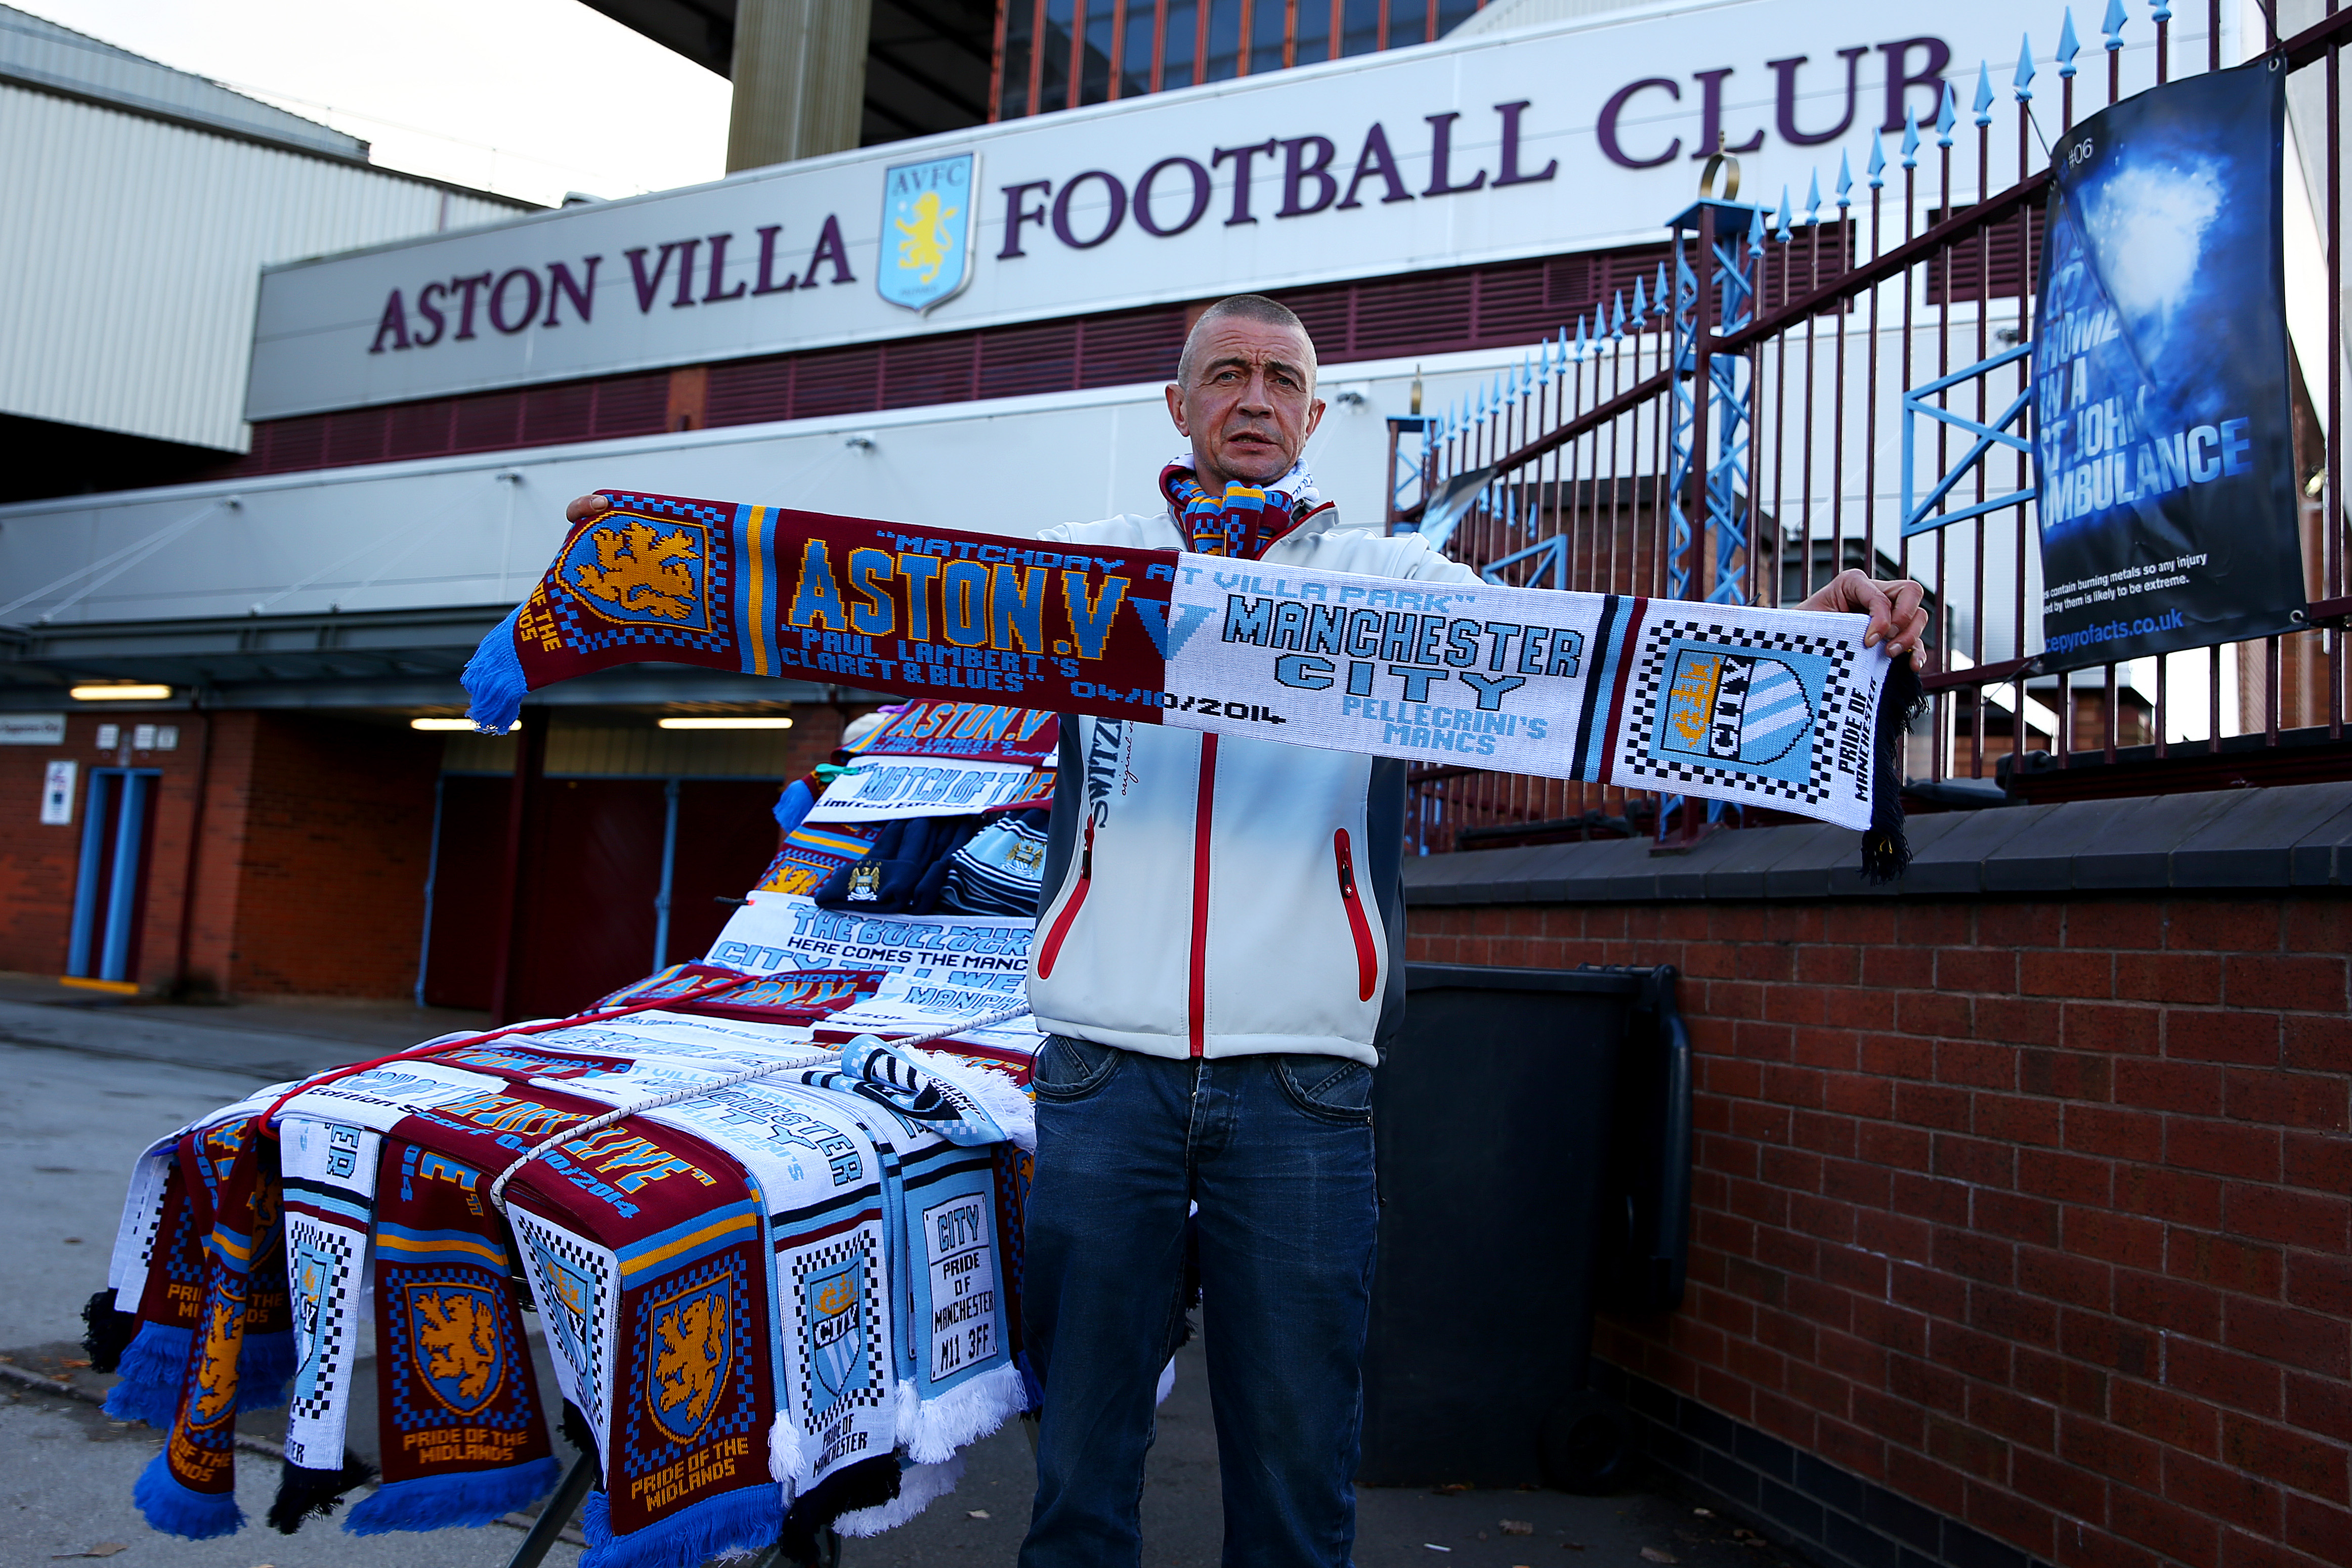 BIRMINGHAM, ENGLAND - OCTOBER 04:  A vendor poses with scarves for sale at a stall outside the stadium before the Barclays Premier League match between Aston Villa and Manchester City at Villa Park on October 4, 2014 in Birmingham, England.  (Photo by Ian Walton/Getty Images)